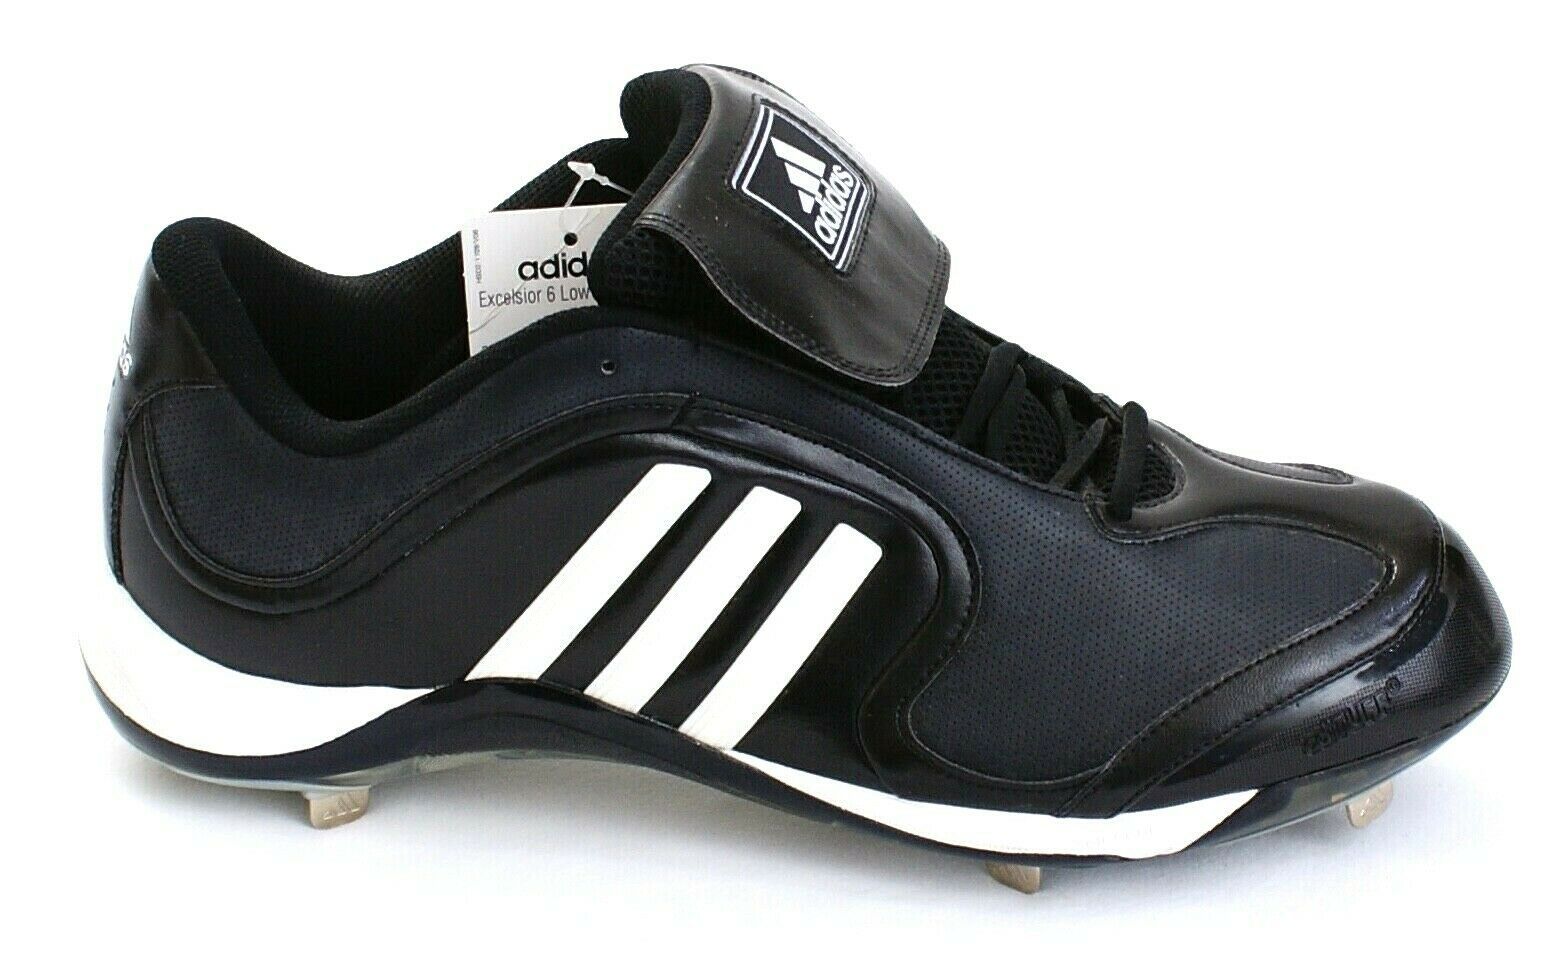 Primary image for Adidas Excelsior 6 Low Black & White Metal Baseball Softball Cleats Mens NEW